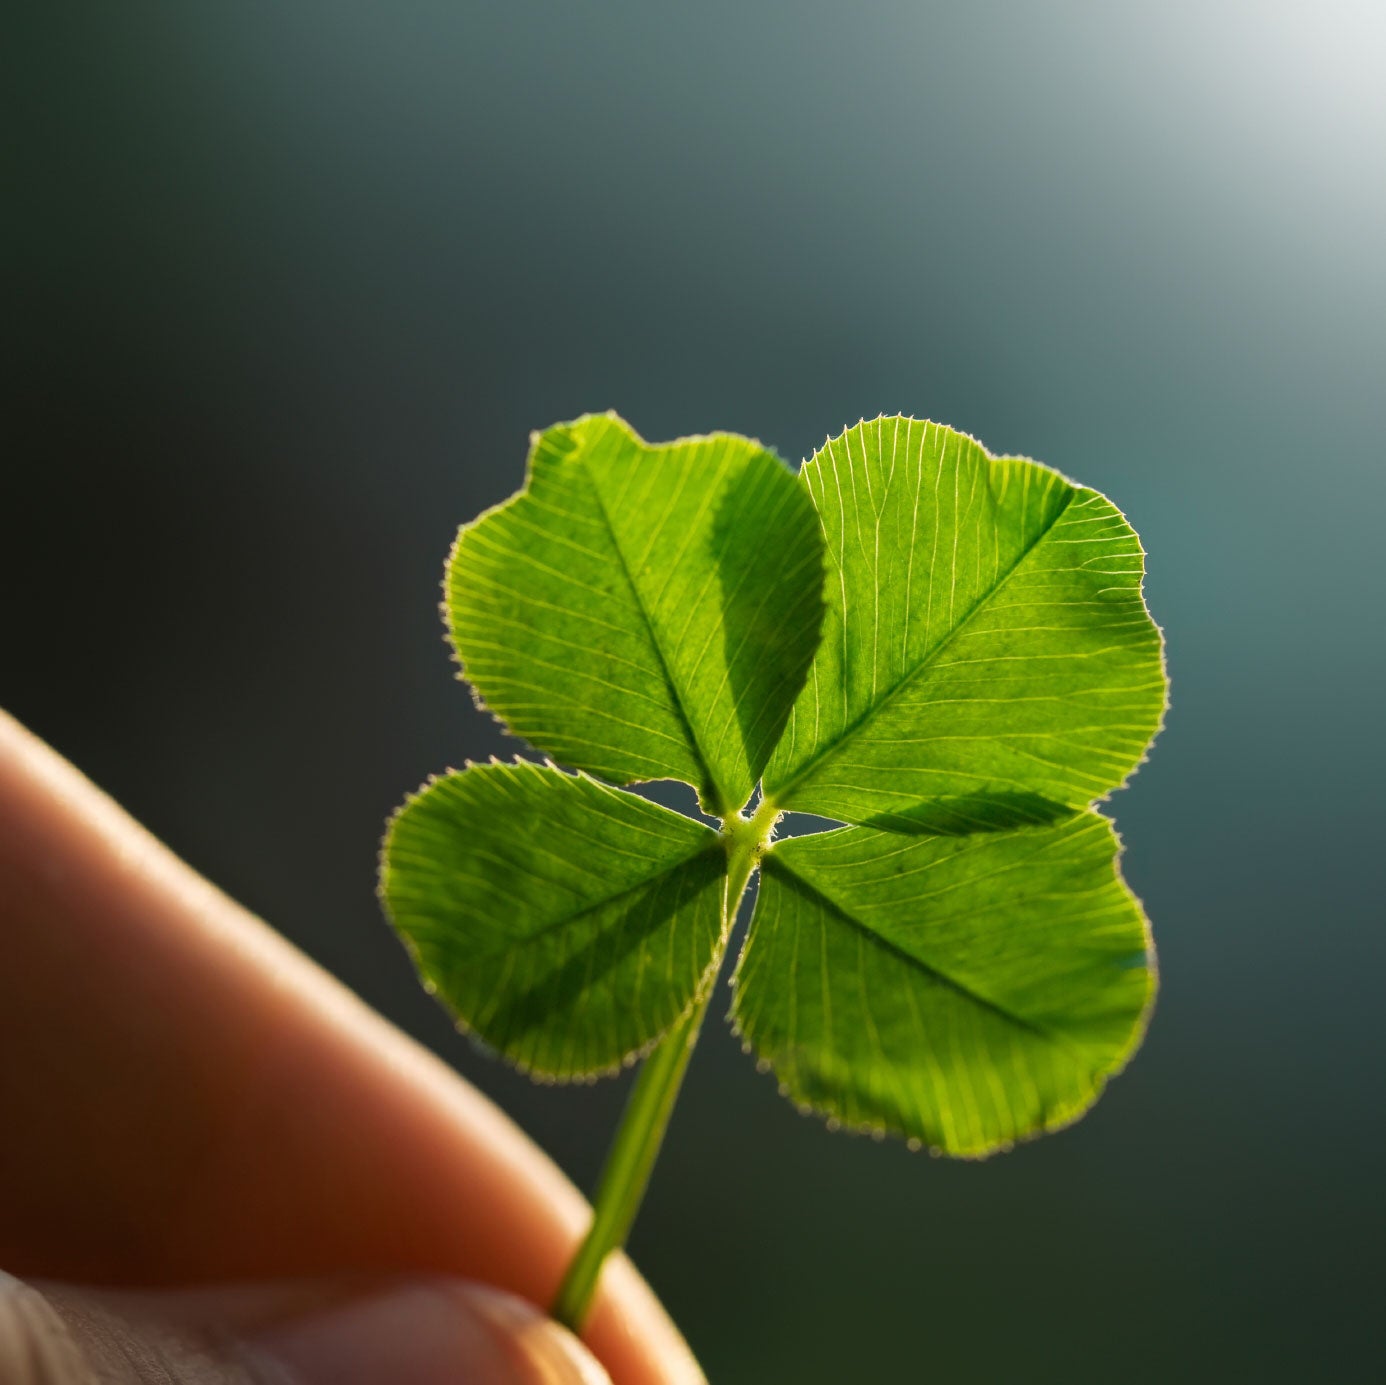 About Four Leaf Clovers - Reasons For Finding A Clover With Four Leaves